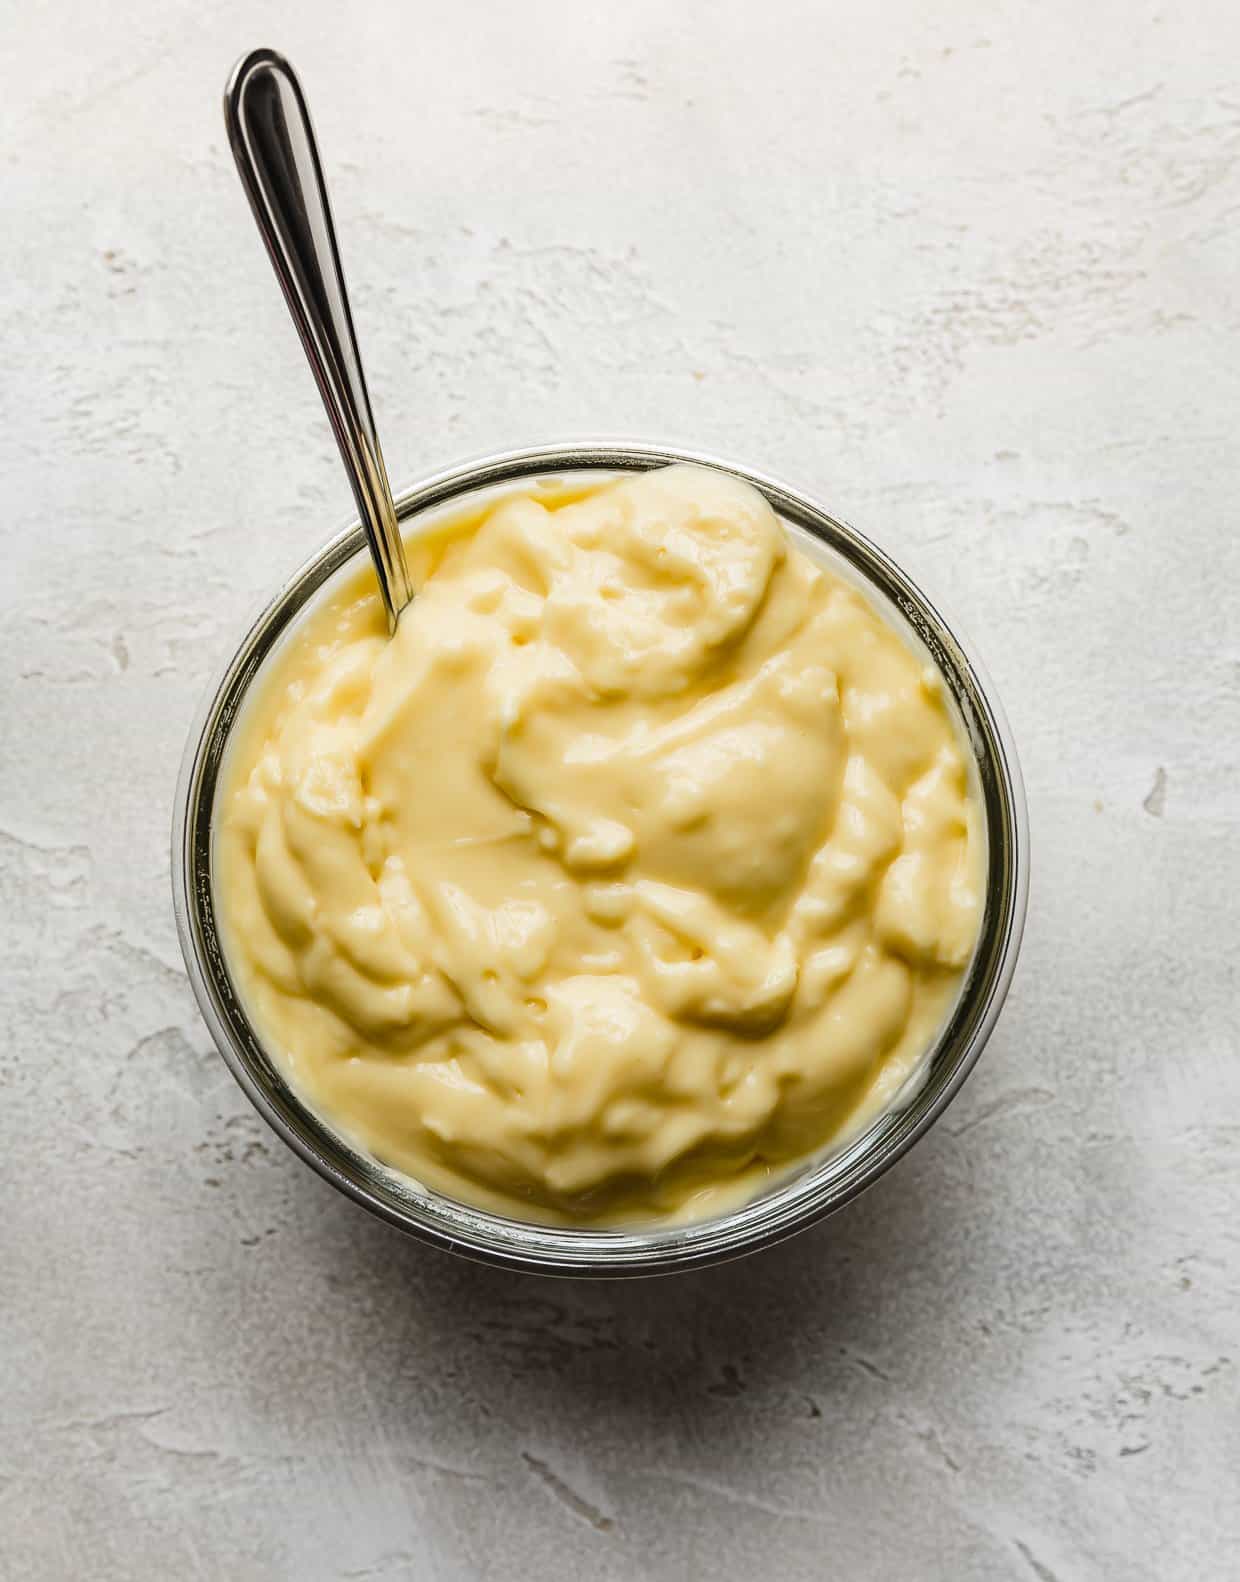 A yellow coconut pudding filling in a glass bowl on a light gray background.